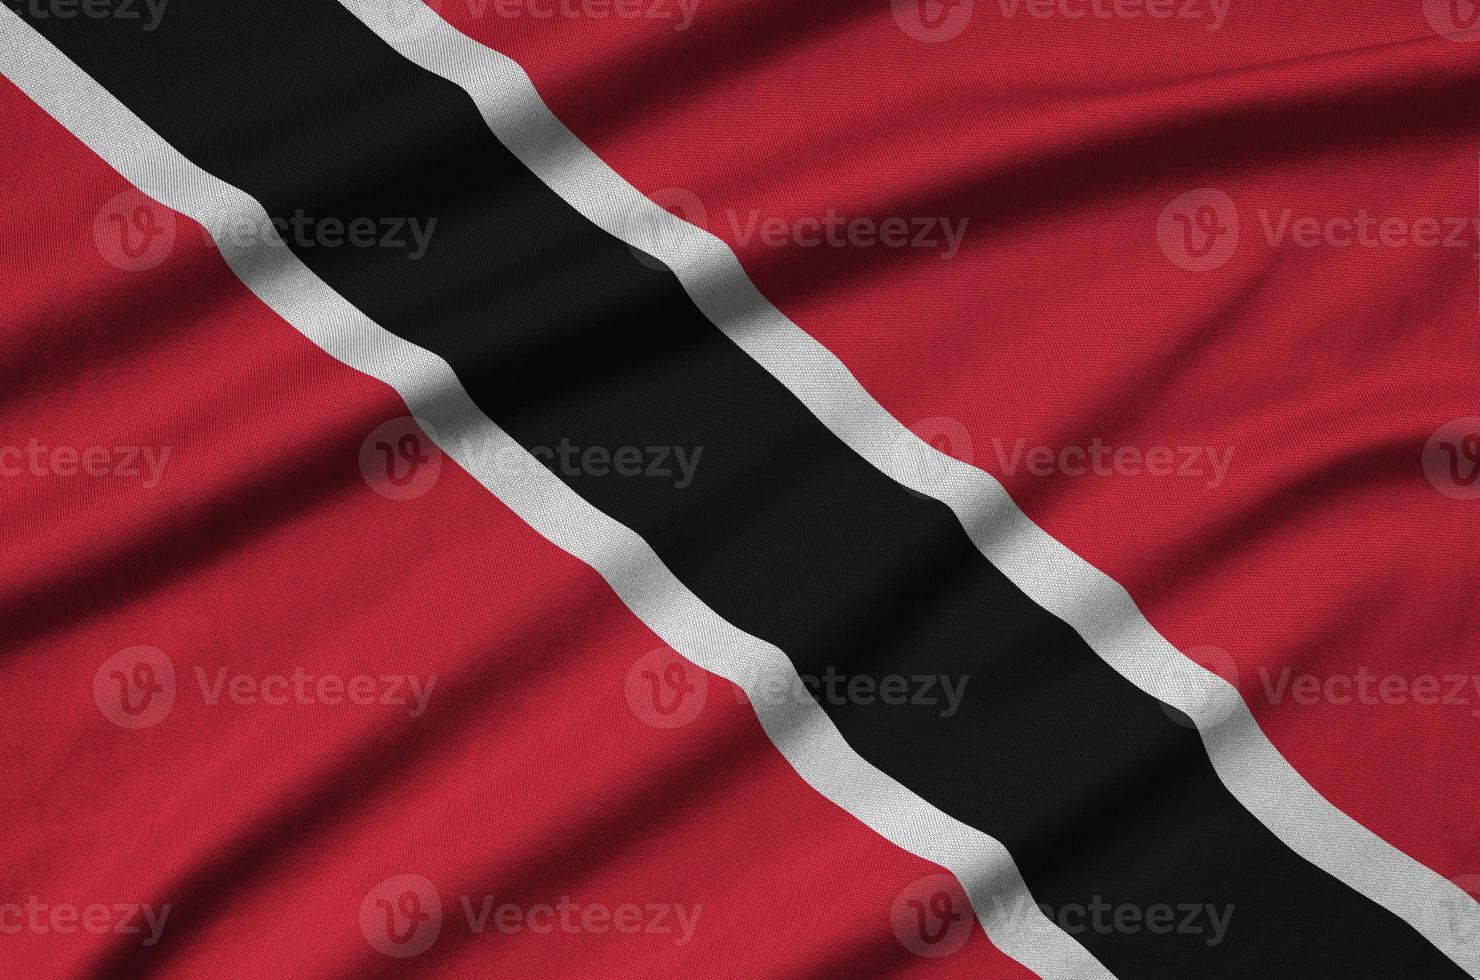 Trinidad and Tobago flag  is depicted on a sports cloth fabric with many folds. Sport team banner photo